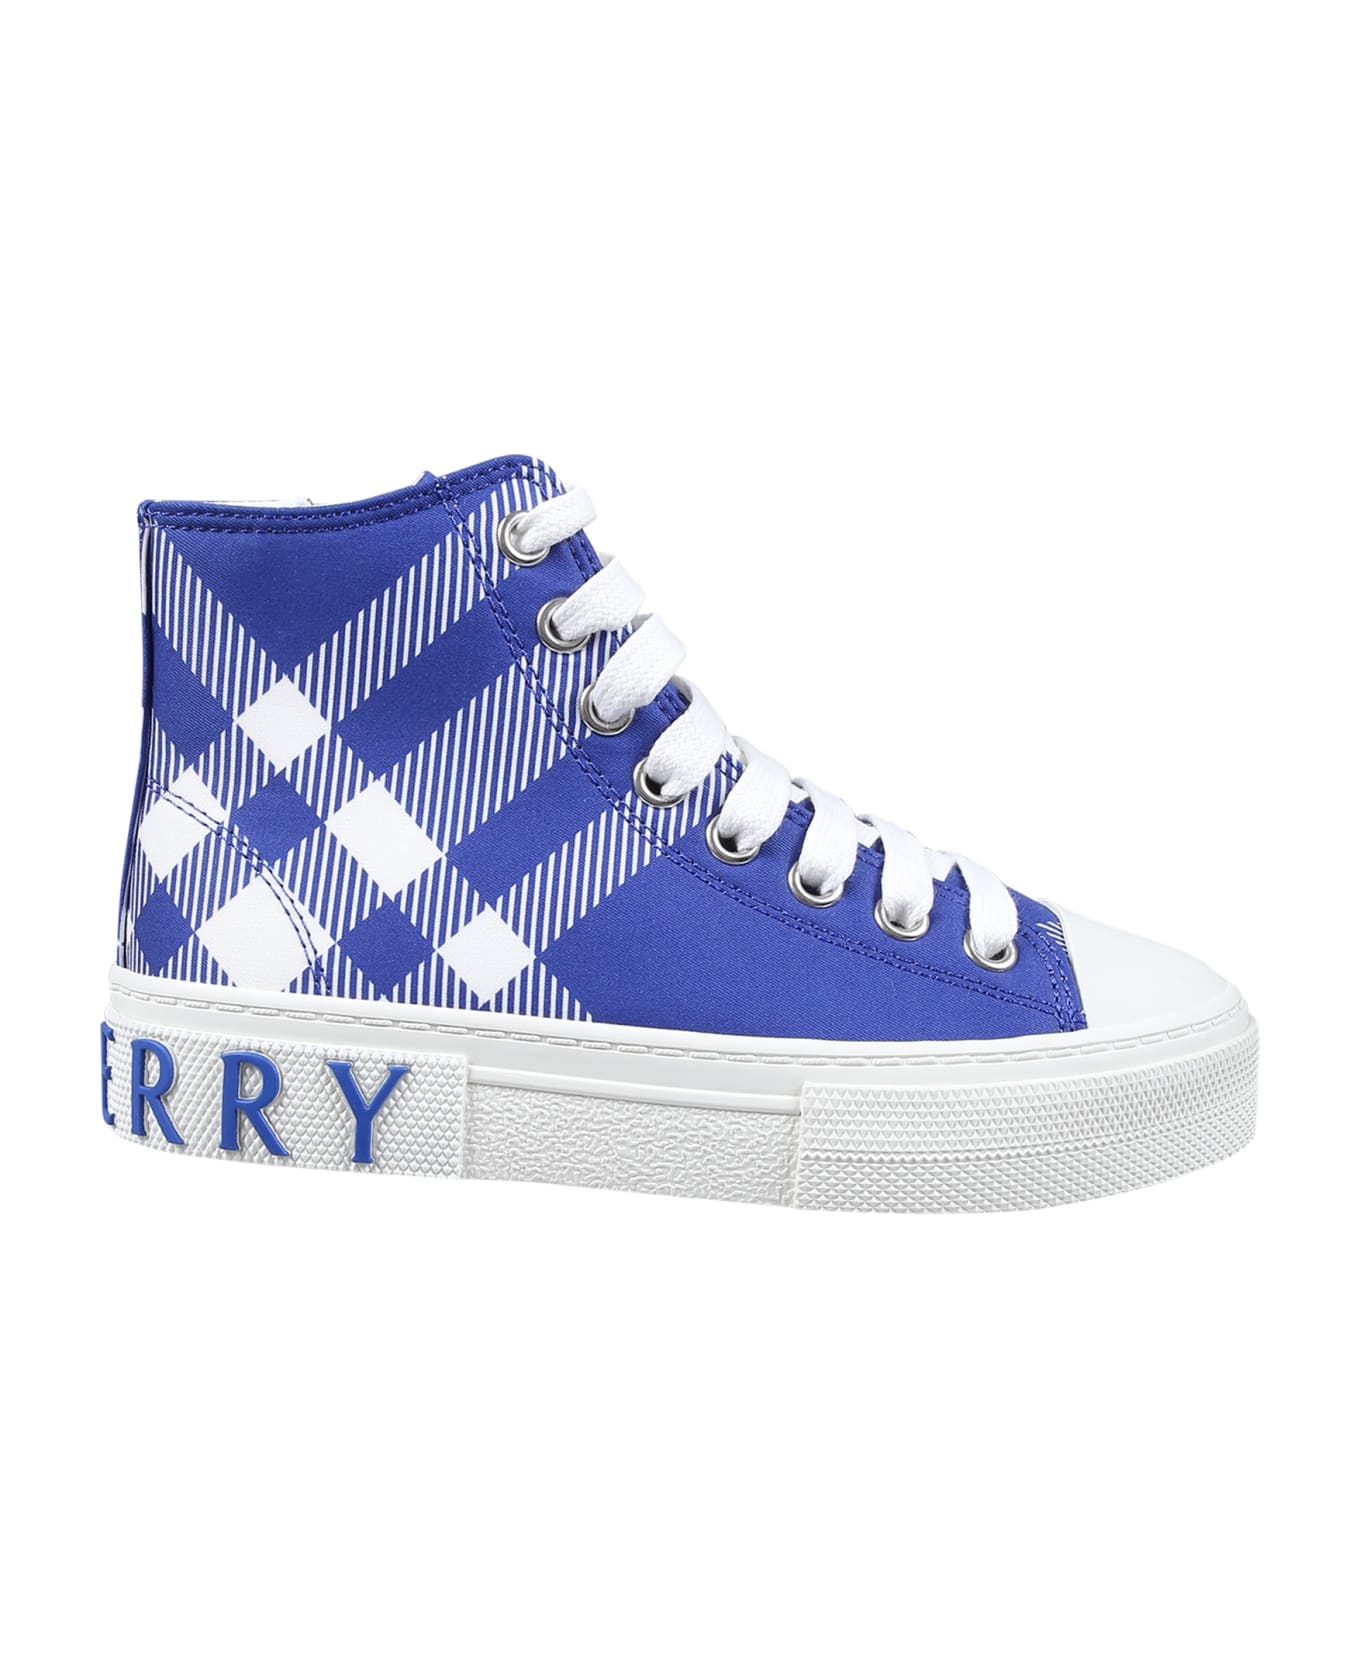 Burberry Blue Sneakers For Kids With Logo - Blue シューズ